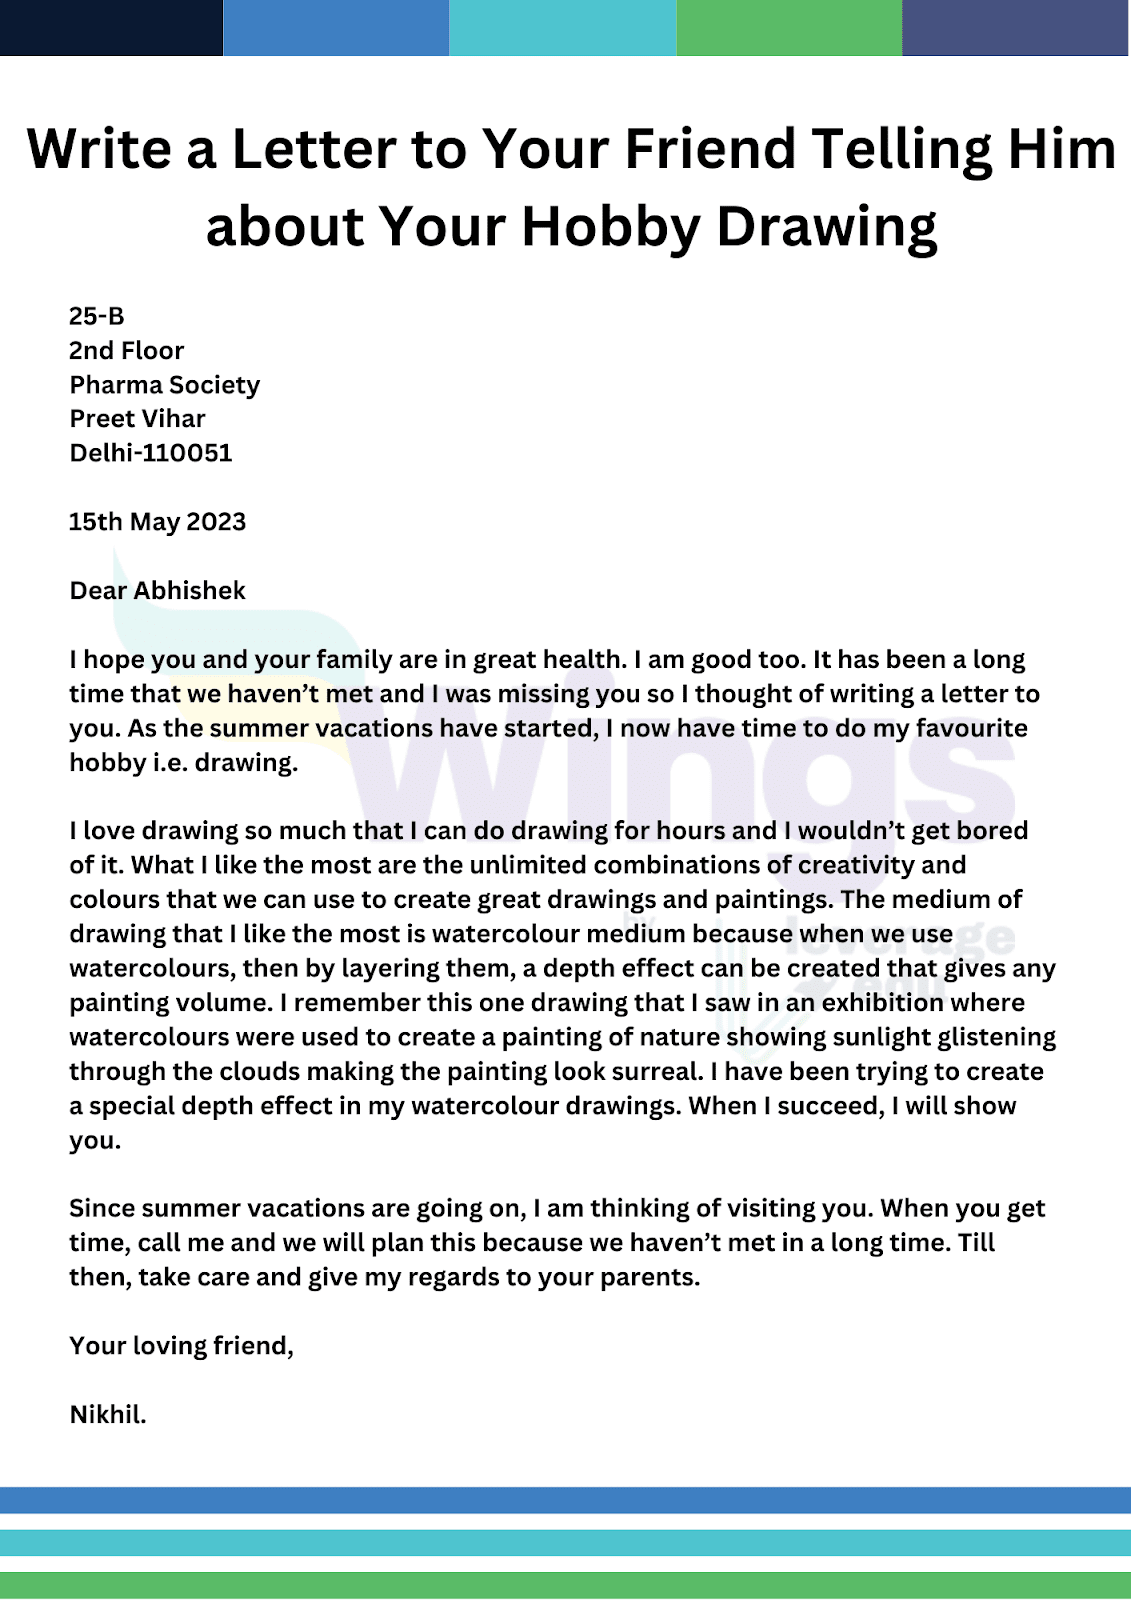 Write a Letter to Your Friend Telling Him about Your Hobby Drawing     